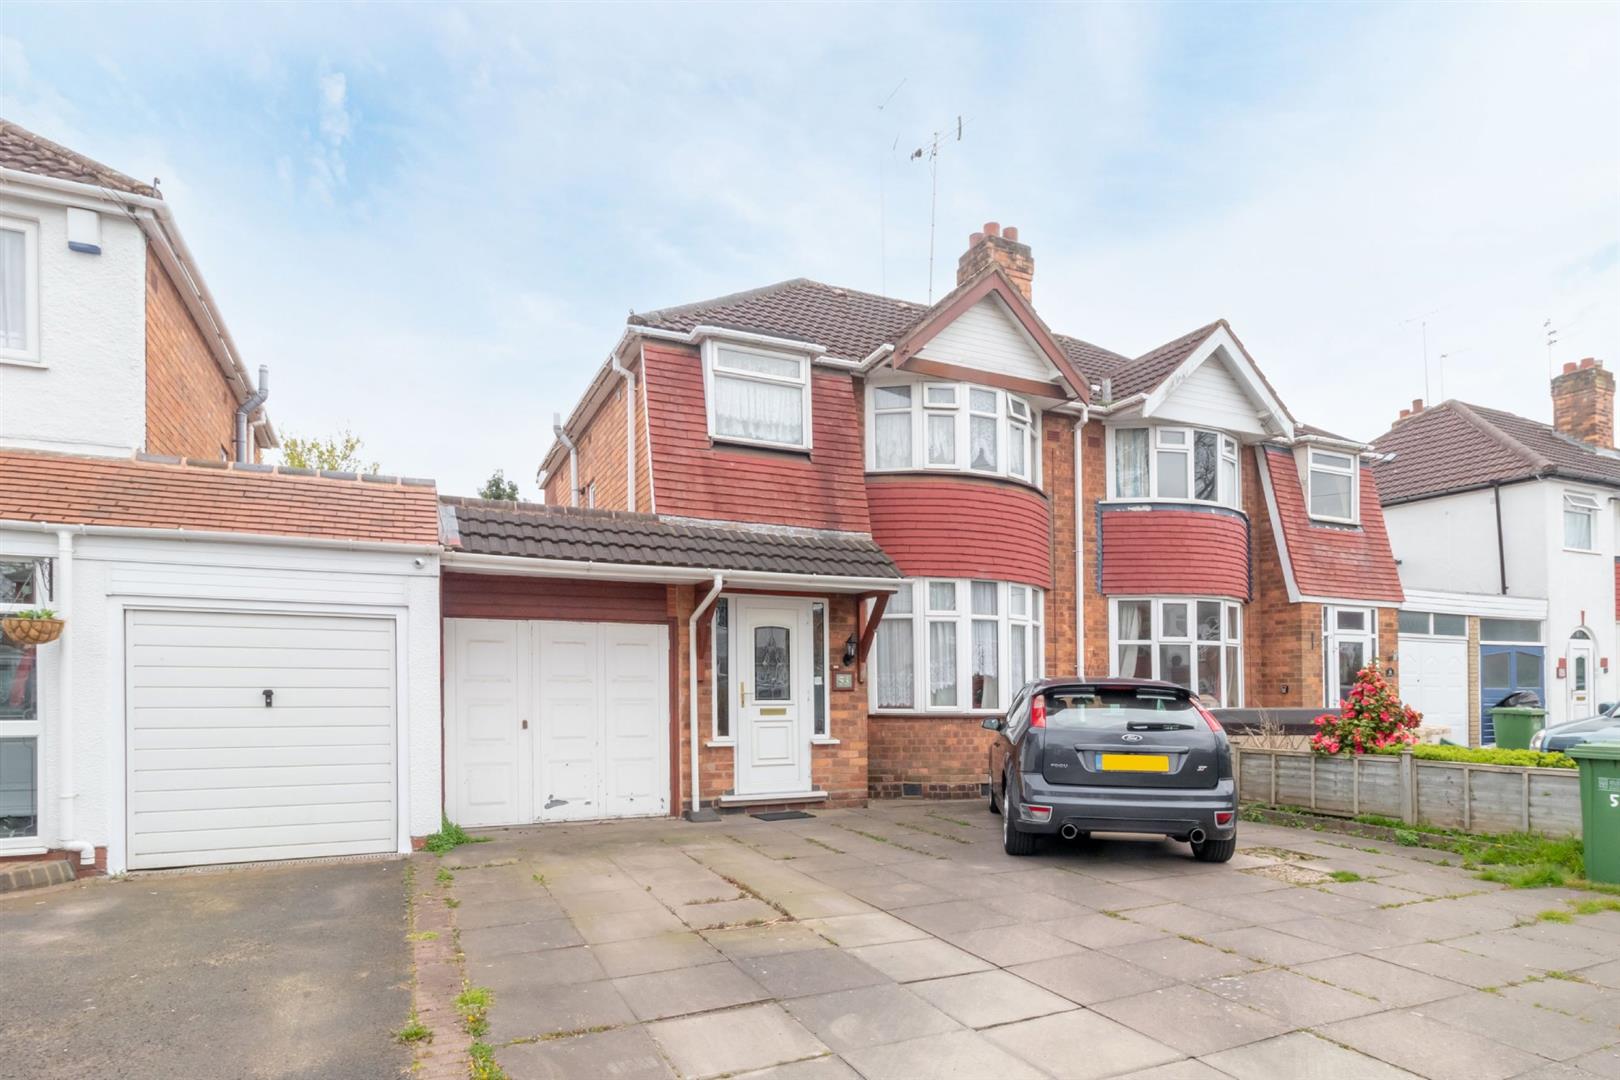 3 bed  for sale in Thurlston Avenue, Solihull, B92 